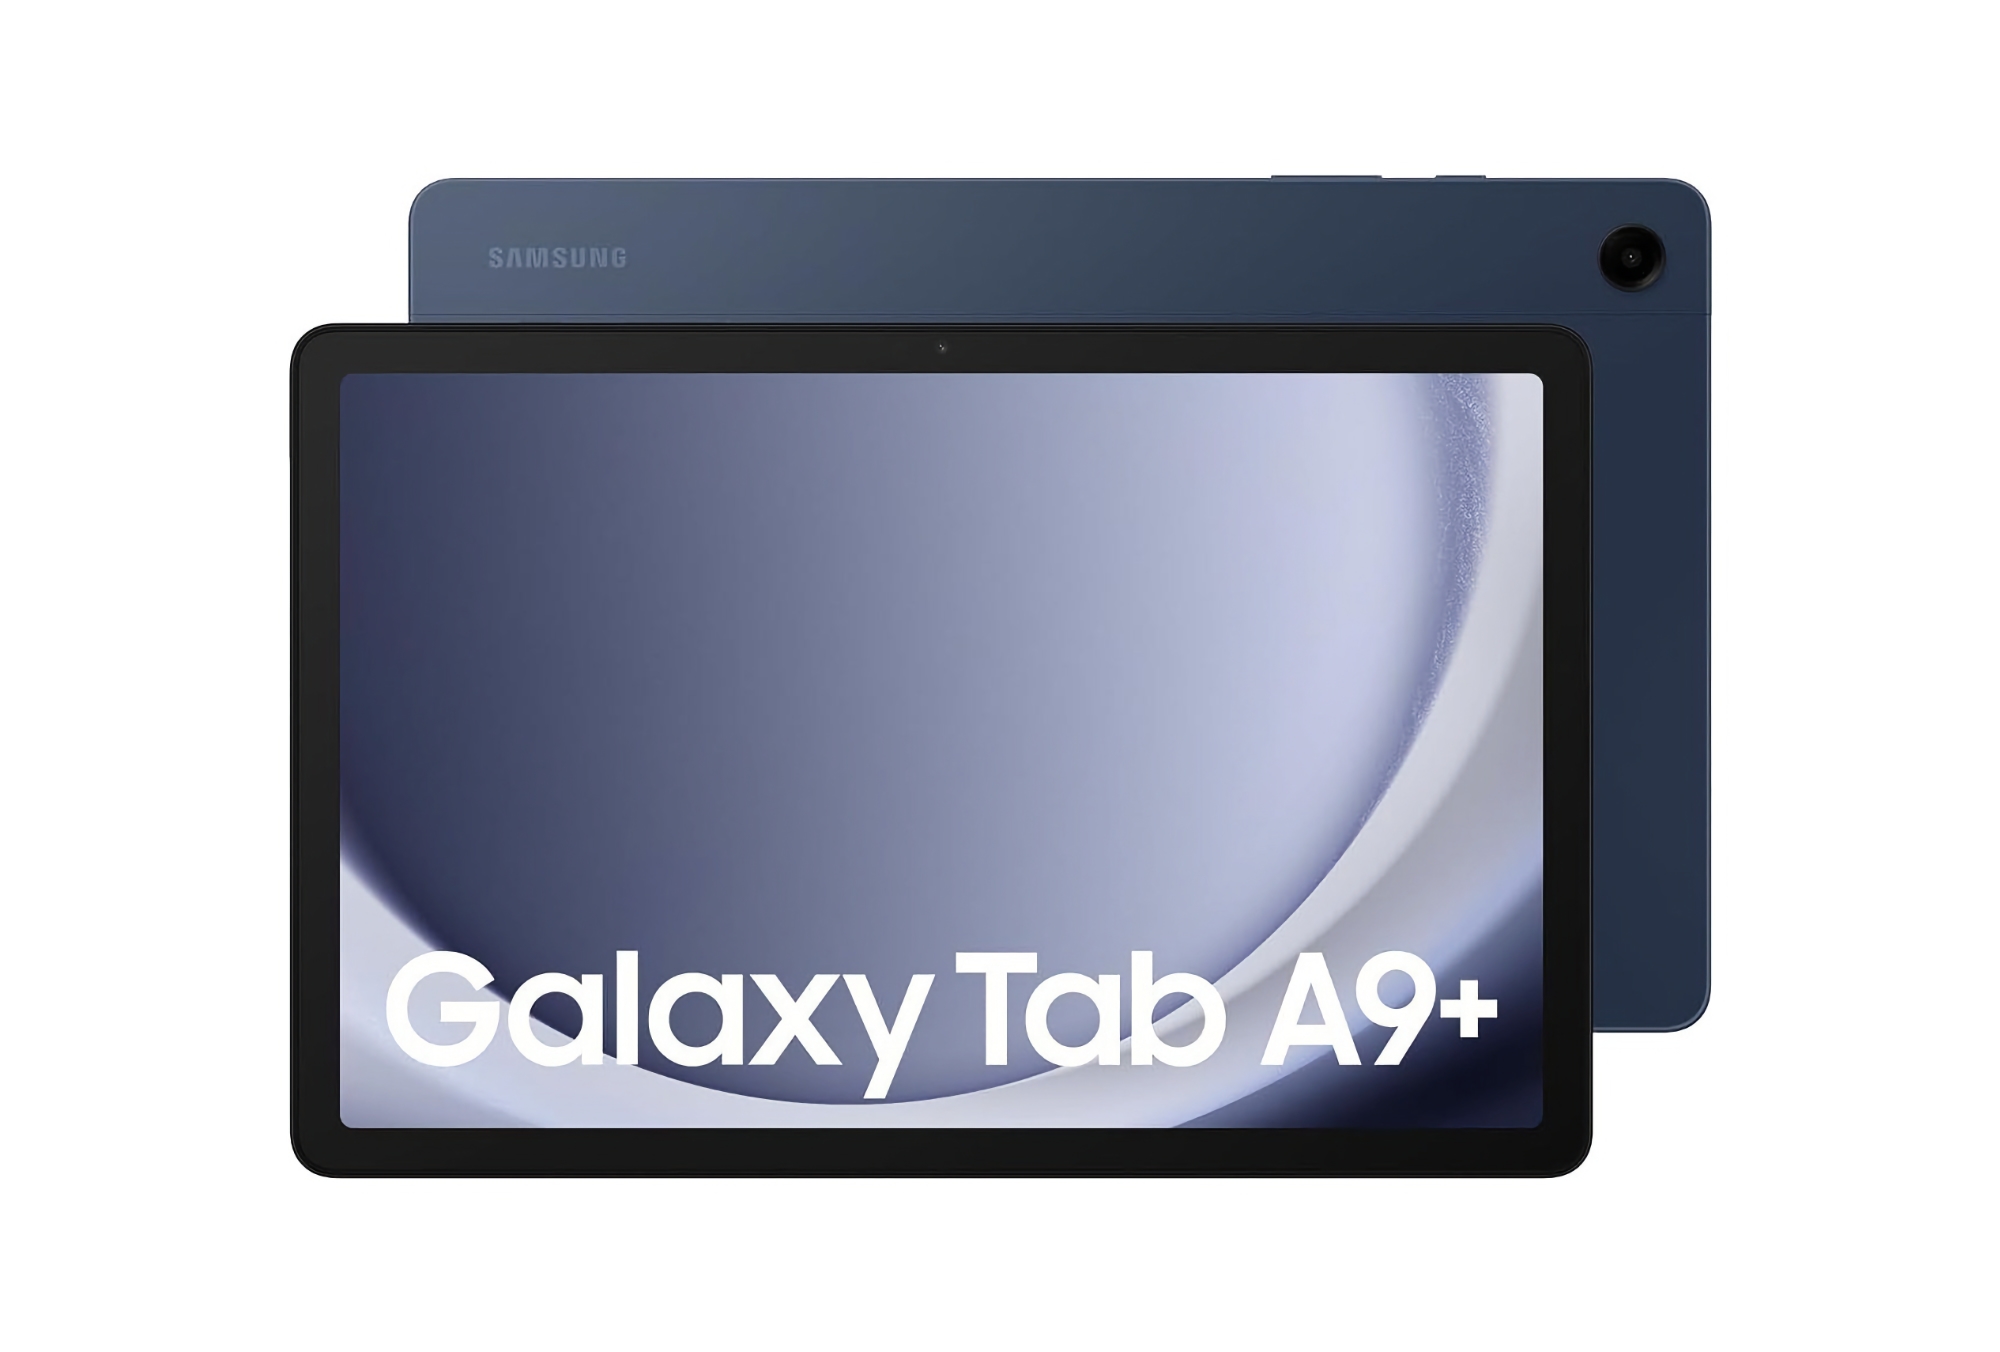 Samsung Galaxy Tab A9+ with 11-inch 90Hz screen, Snapdragon 695 chip and AKG speakers is on sale on Amazon for $50 off